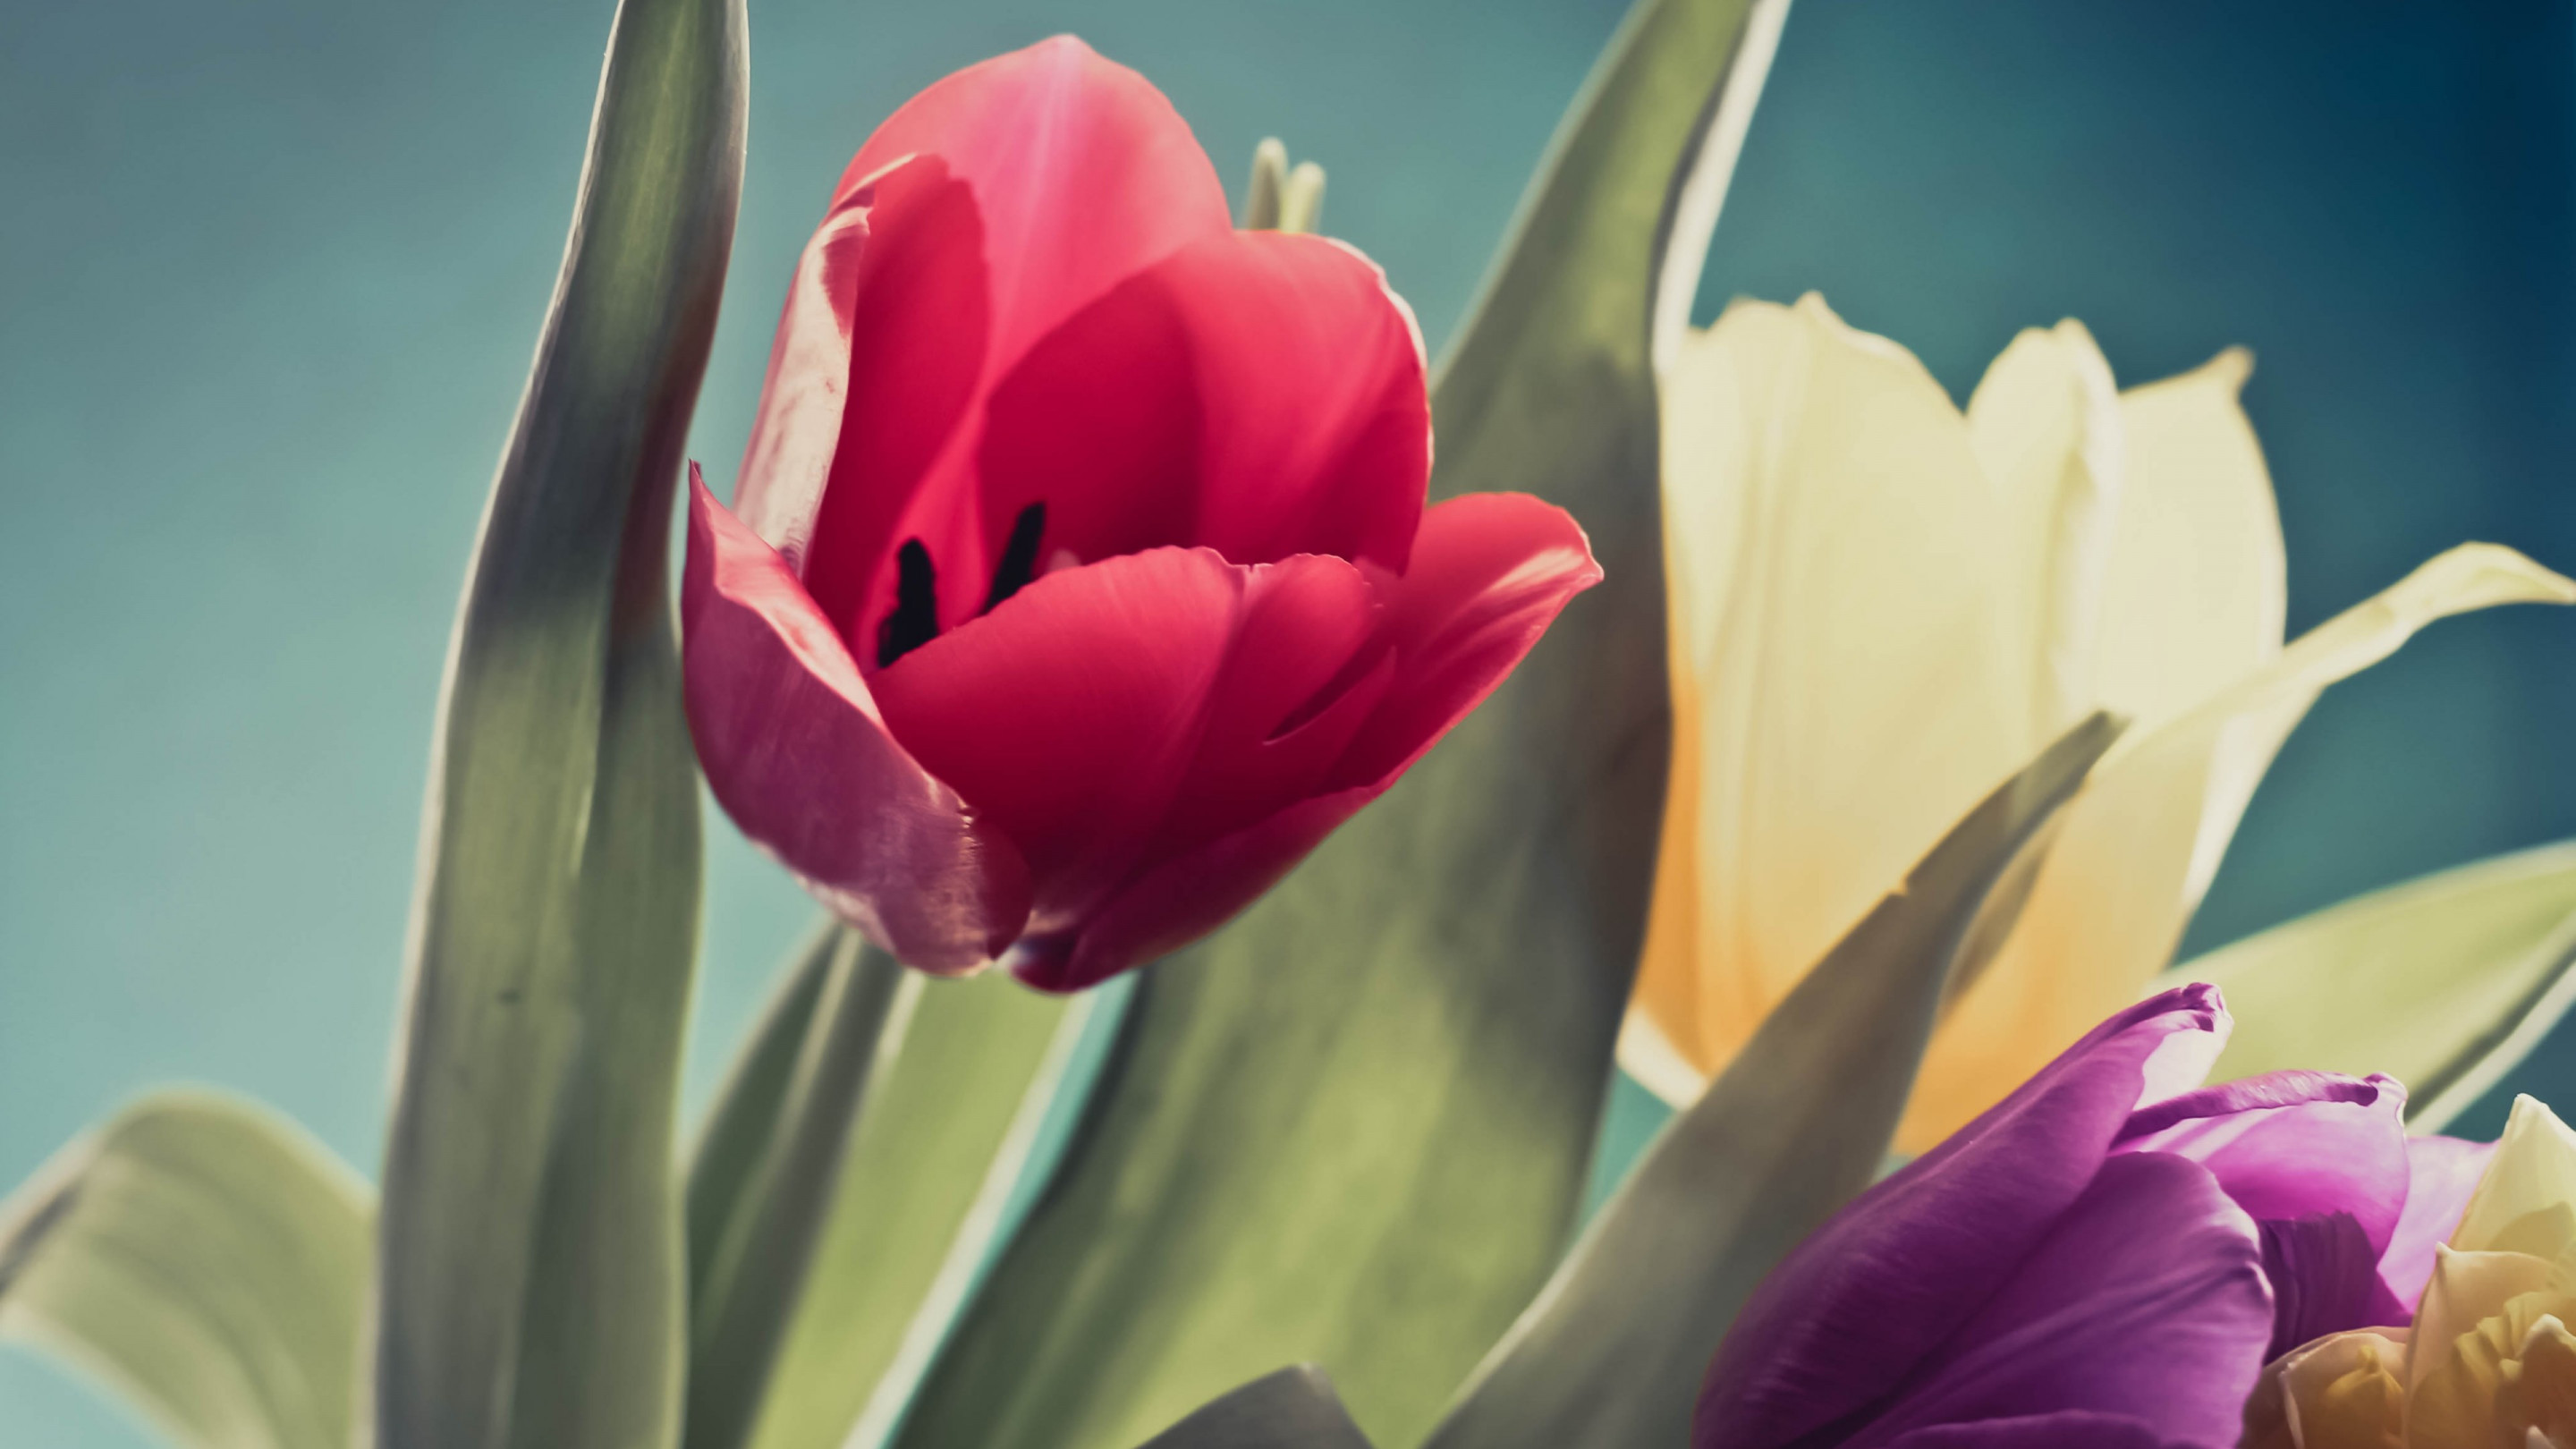 Red, purple and yellow tulips wallpaper 2880x1620